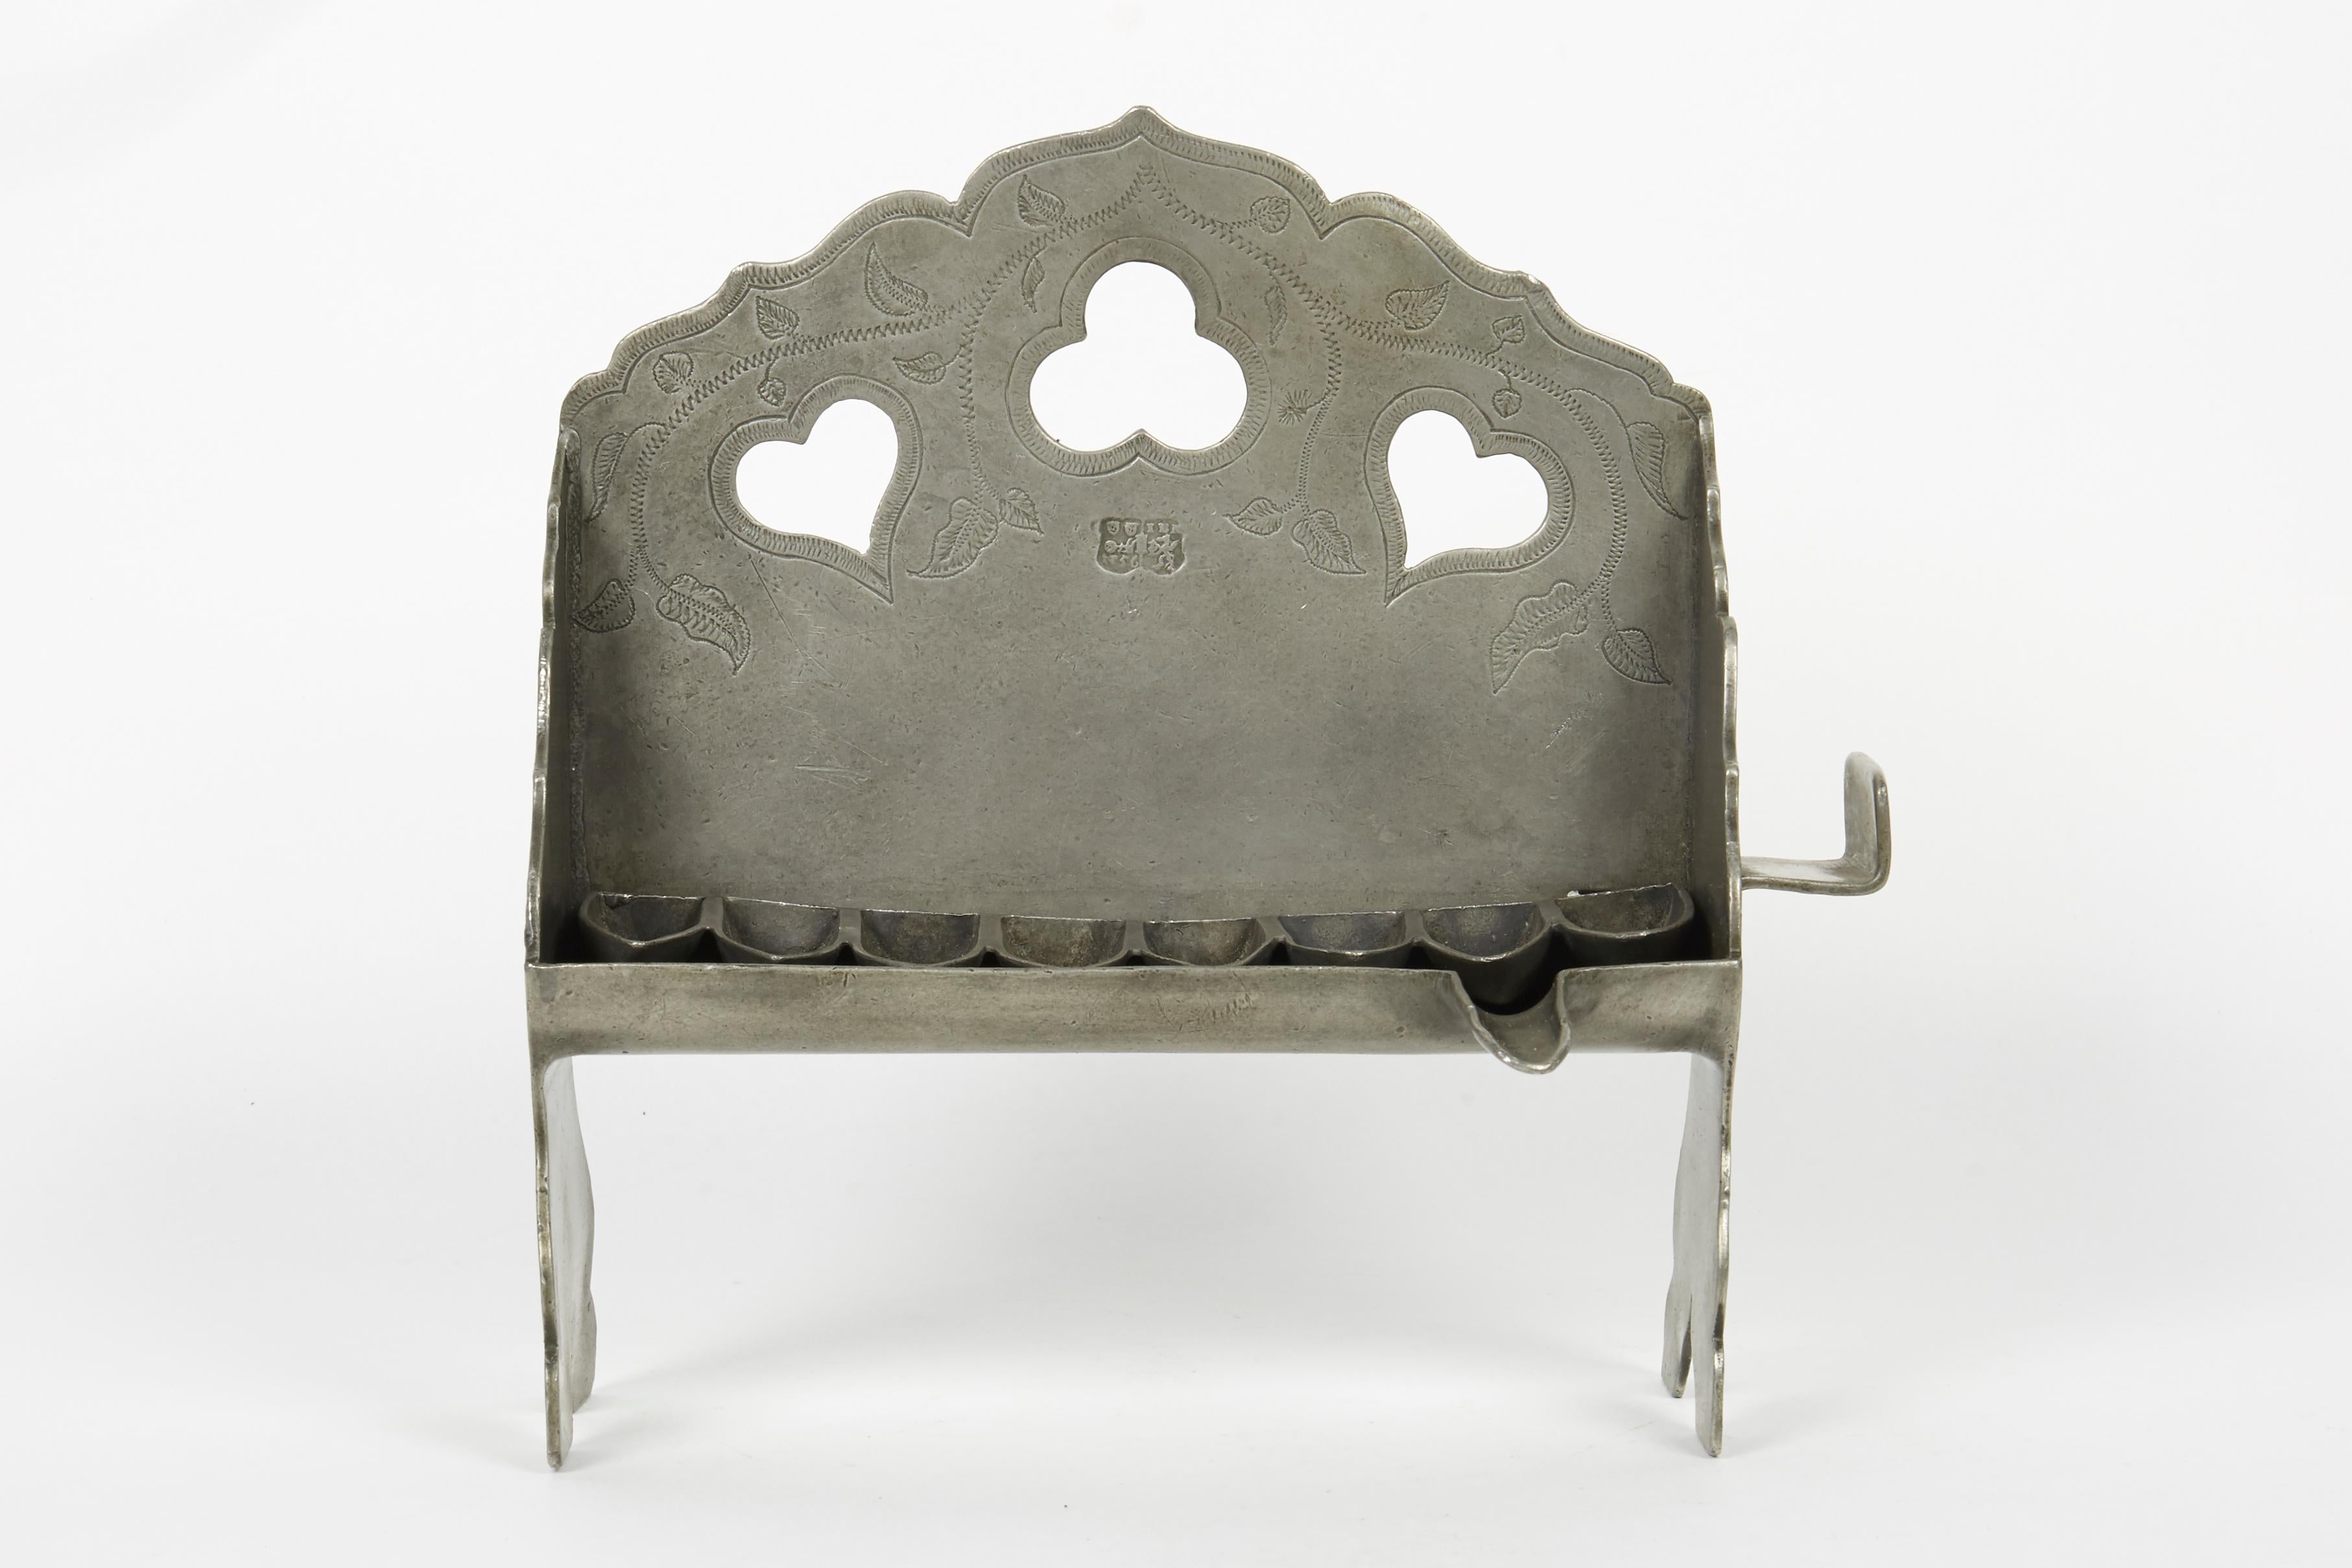 Pewter Hanukkah Lamp, Germany, mid-18th century
The cartouche-form backplate is pierced with heart-shaped holes, engraved with stem and leaves, and fitted with a row of eight oil pans.
Marked with German pewter hallmarks.